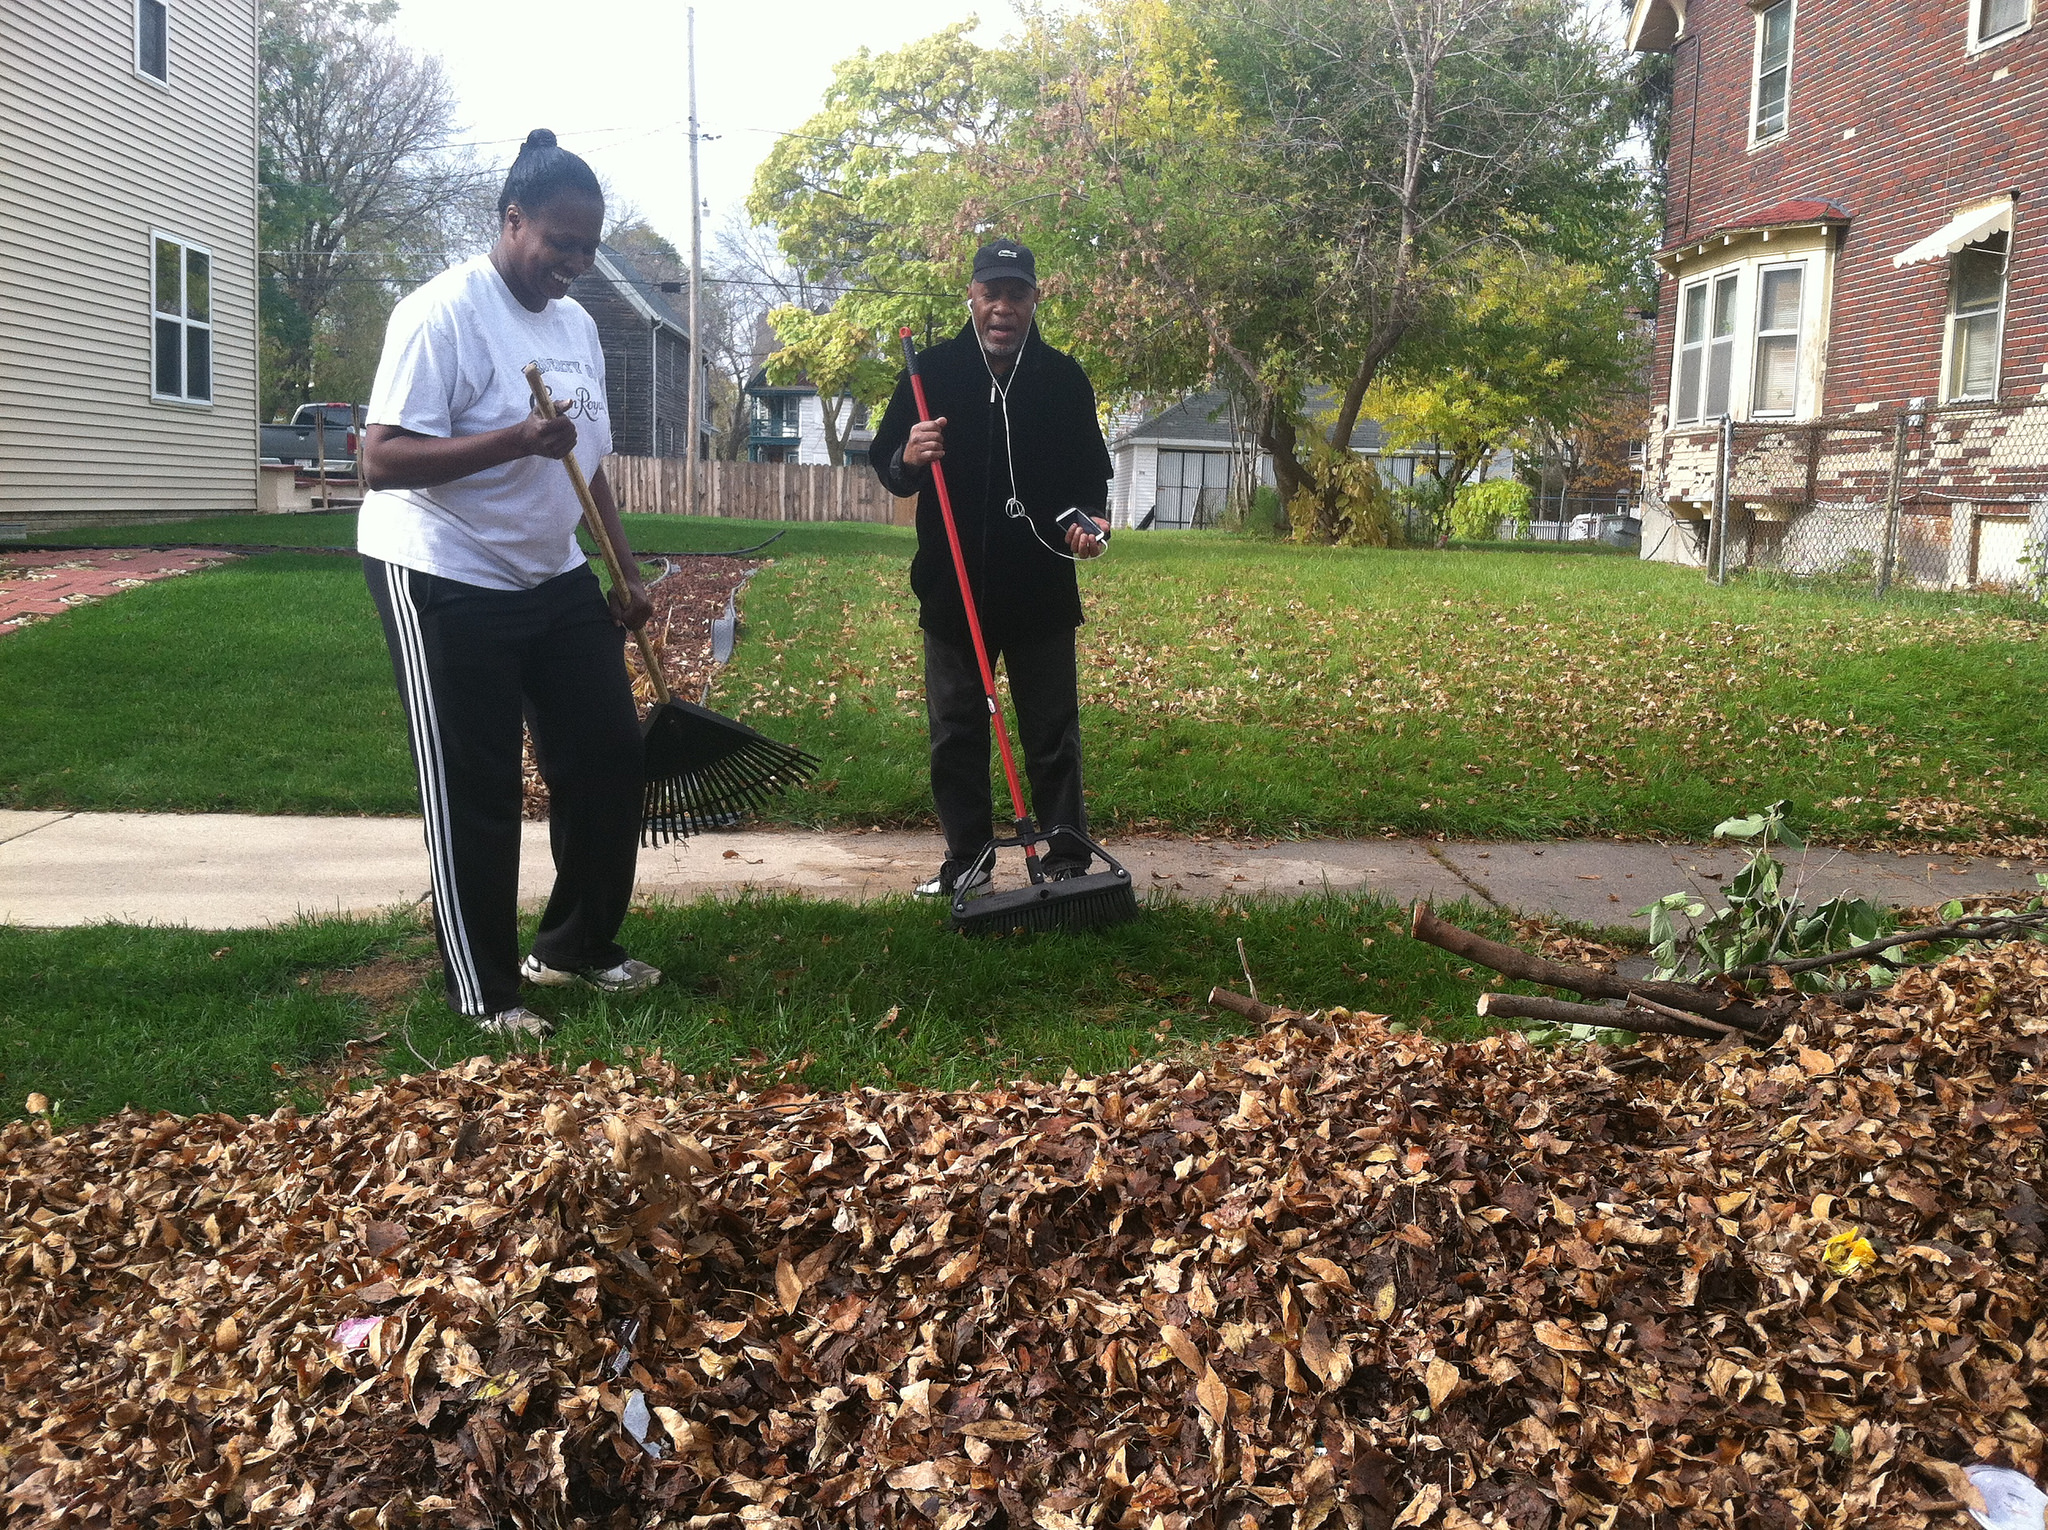 Gladys Carroll-Weathersby, resident, and Jack Hill, son of a resident, raking leaves on the 2400 block of N. 16th Street